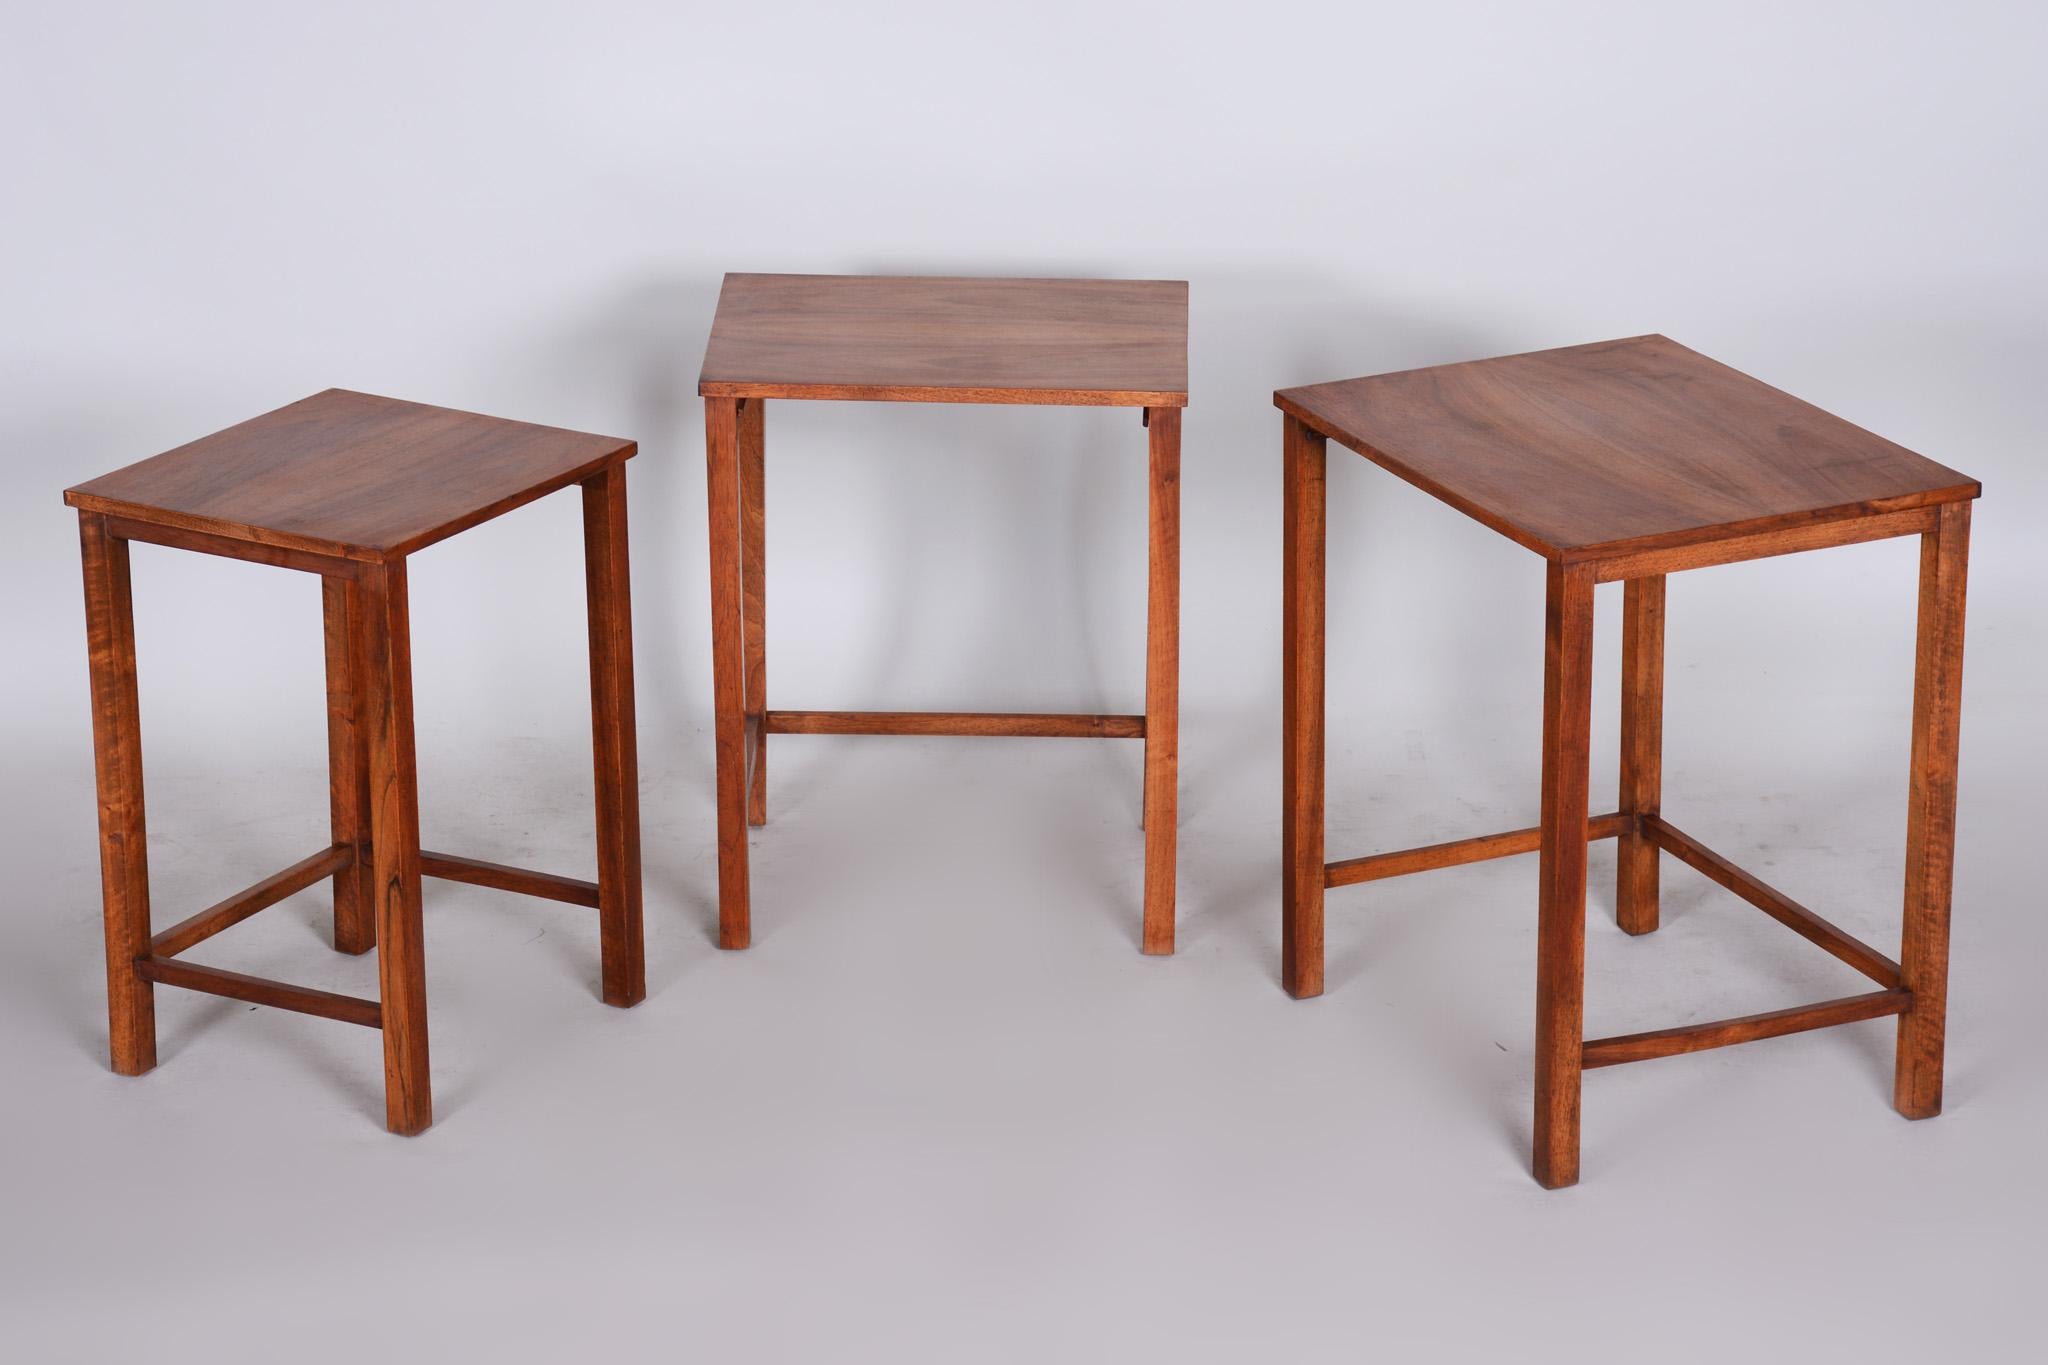 Original Condition Brown Nest Tables Made in the 1930s, Czech For Sale 4